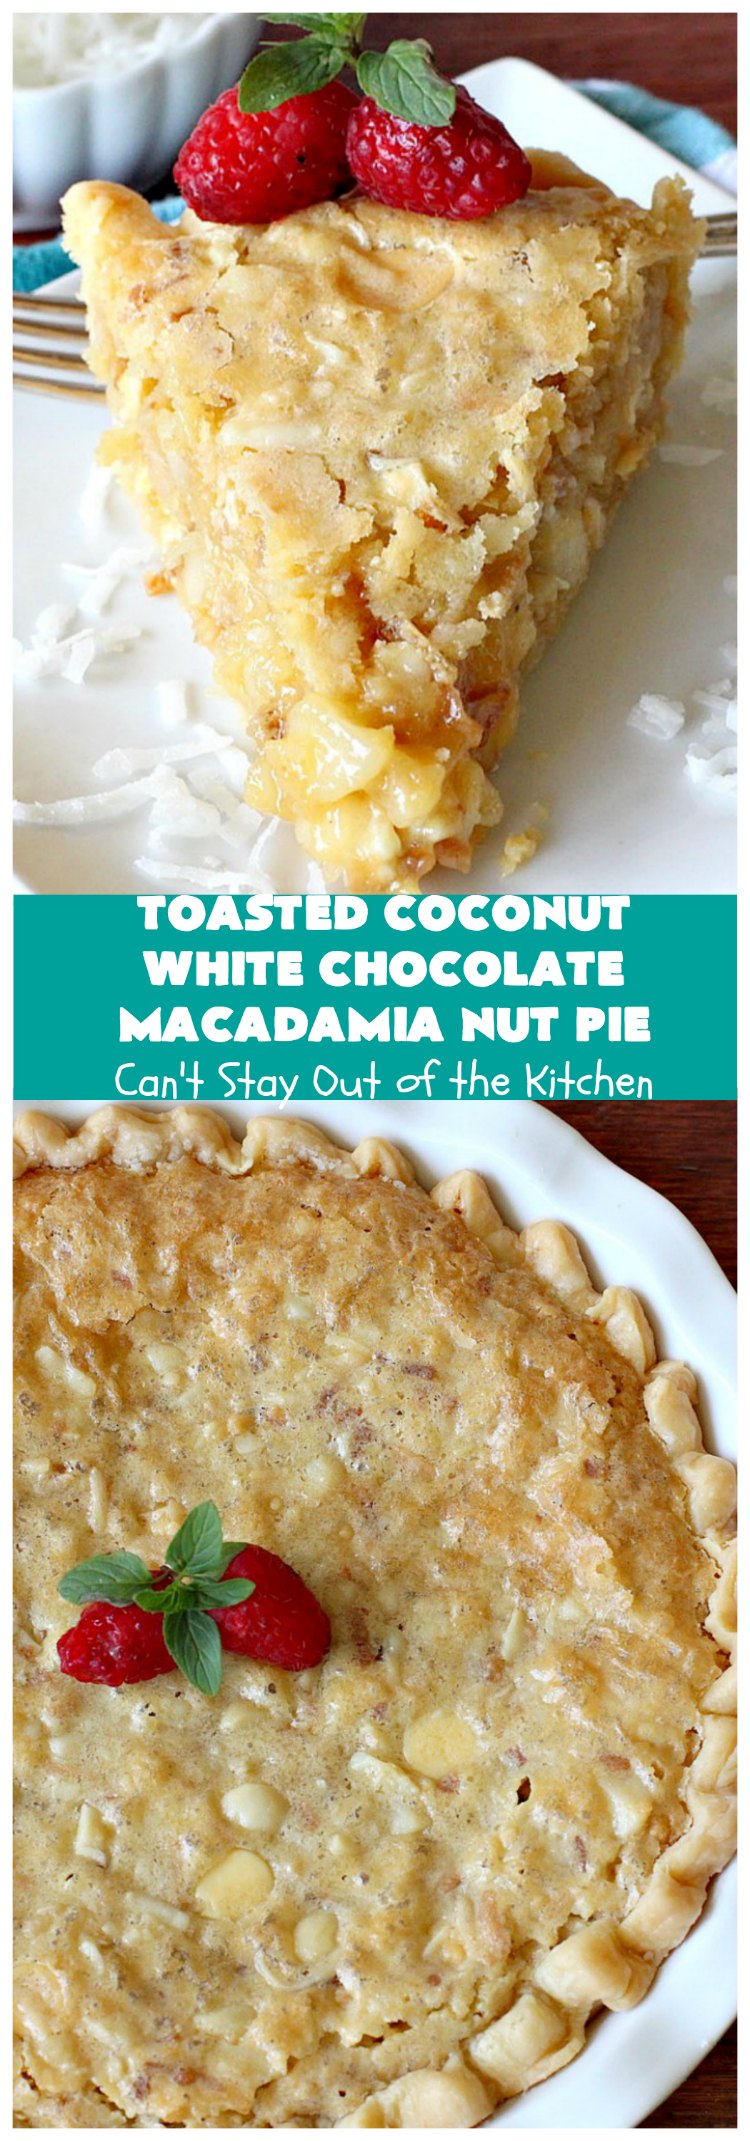 Toasted Coconut White Chocolate Macadamia Nut Pie | Can't Stay Out of the Kitchen